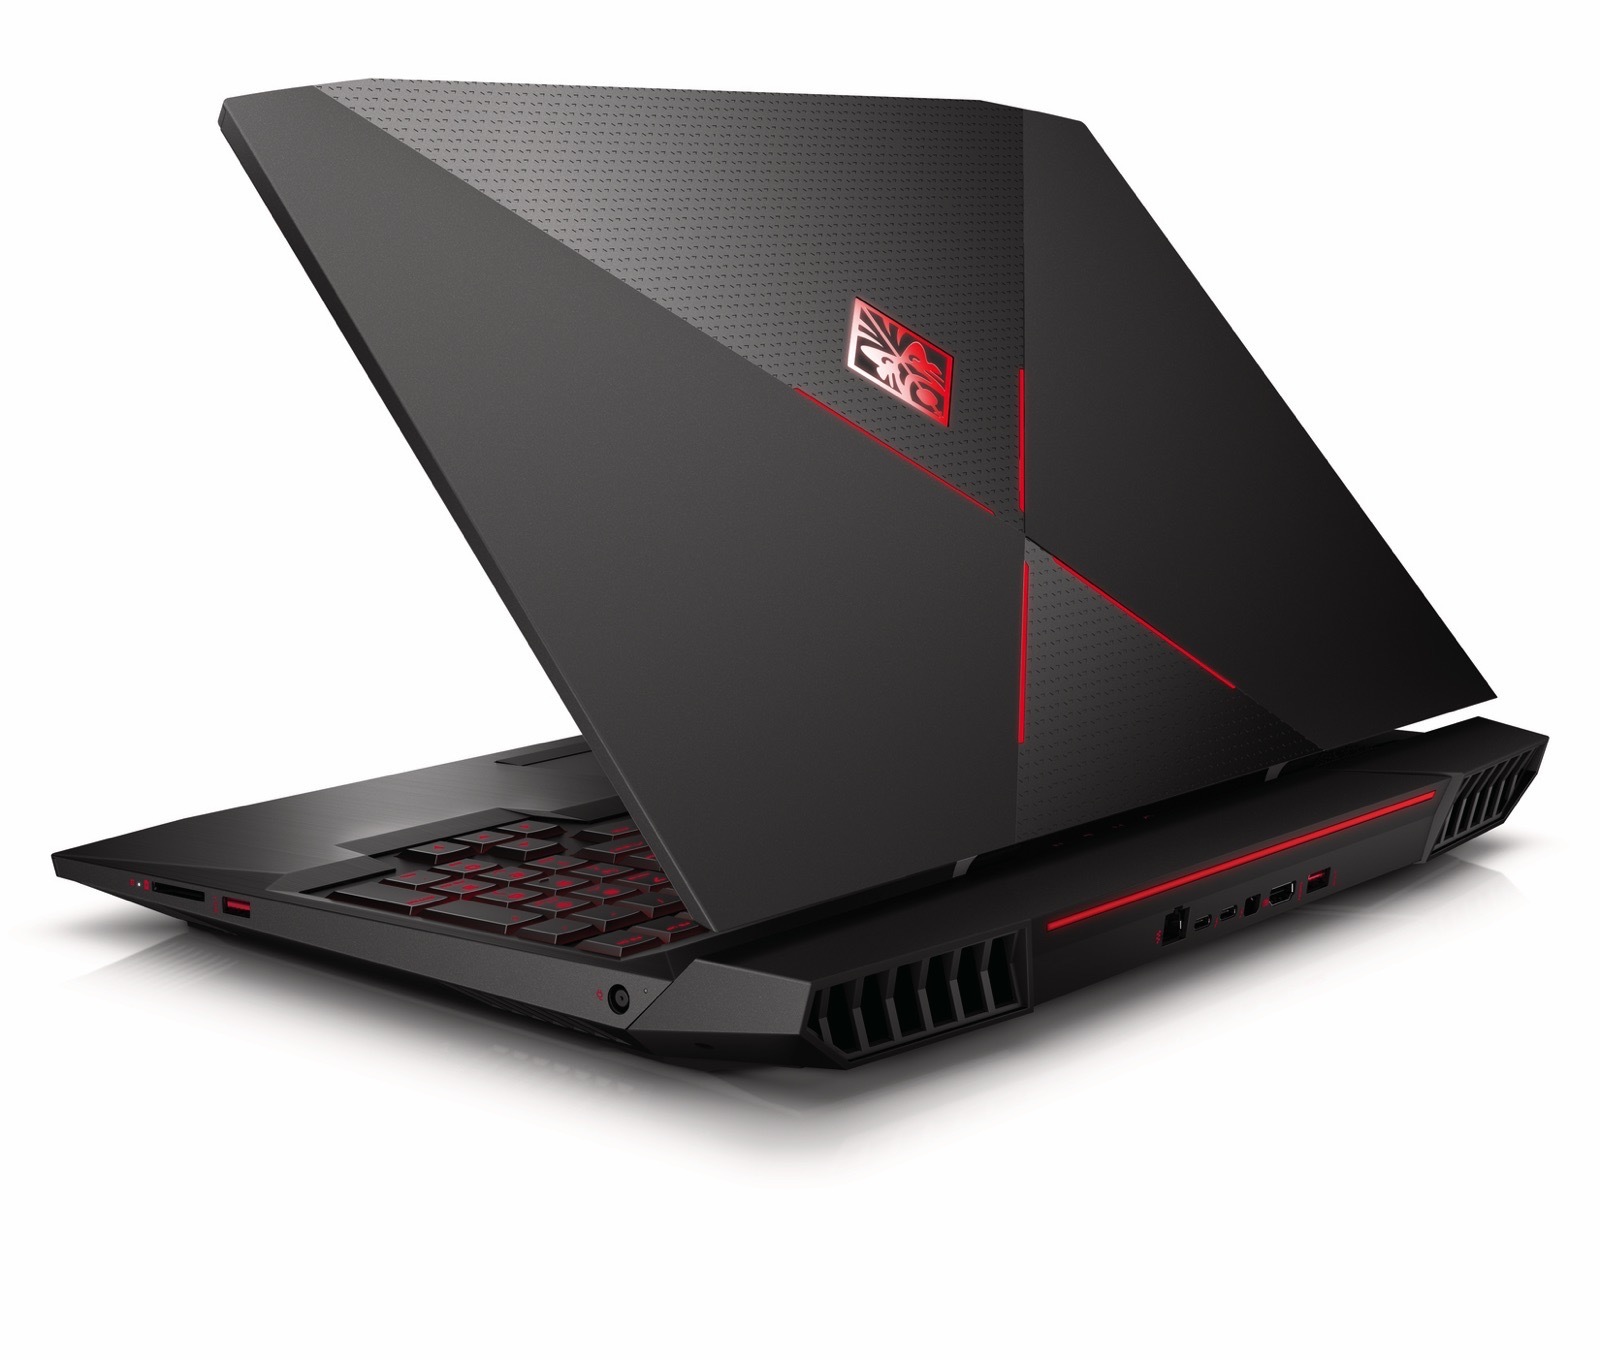 HP's New Omen X Laptop Is A 17inch Gaming Powerhouse With RGB